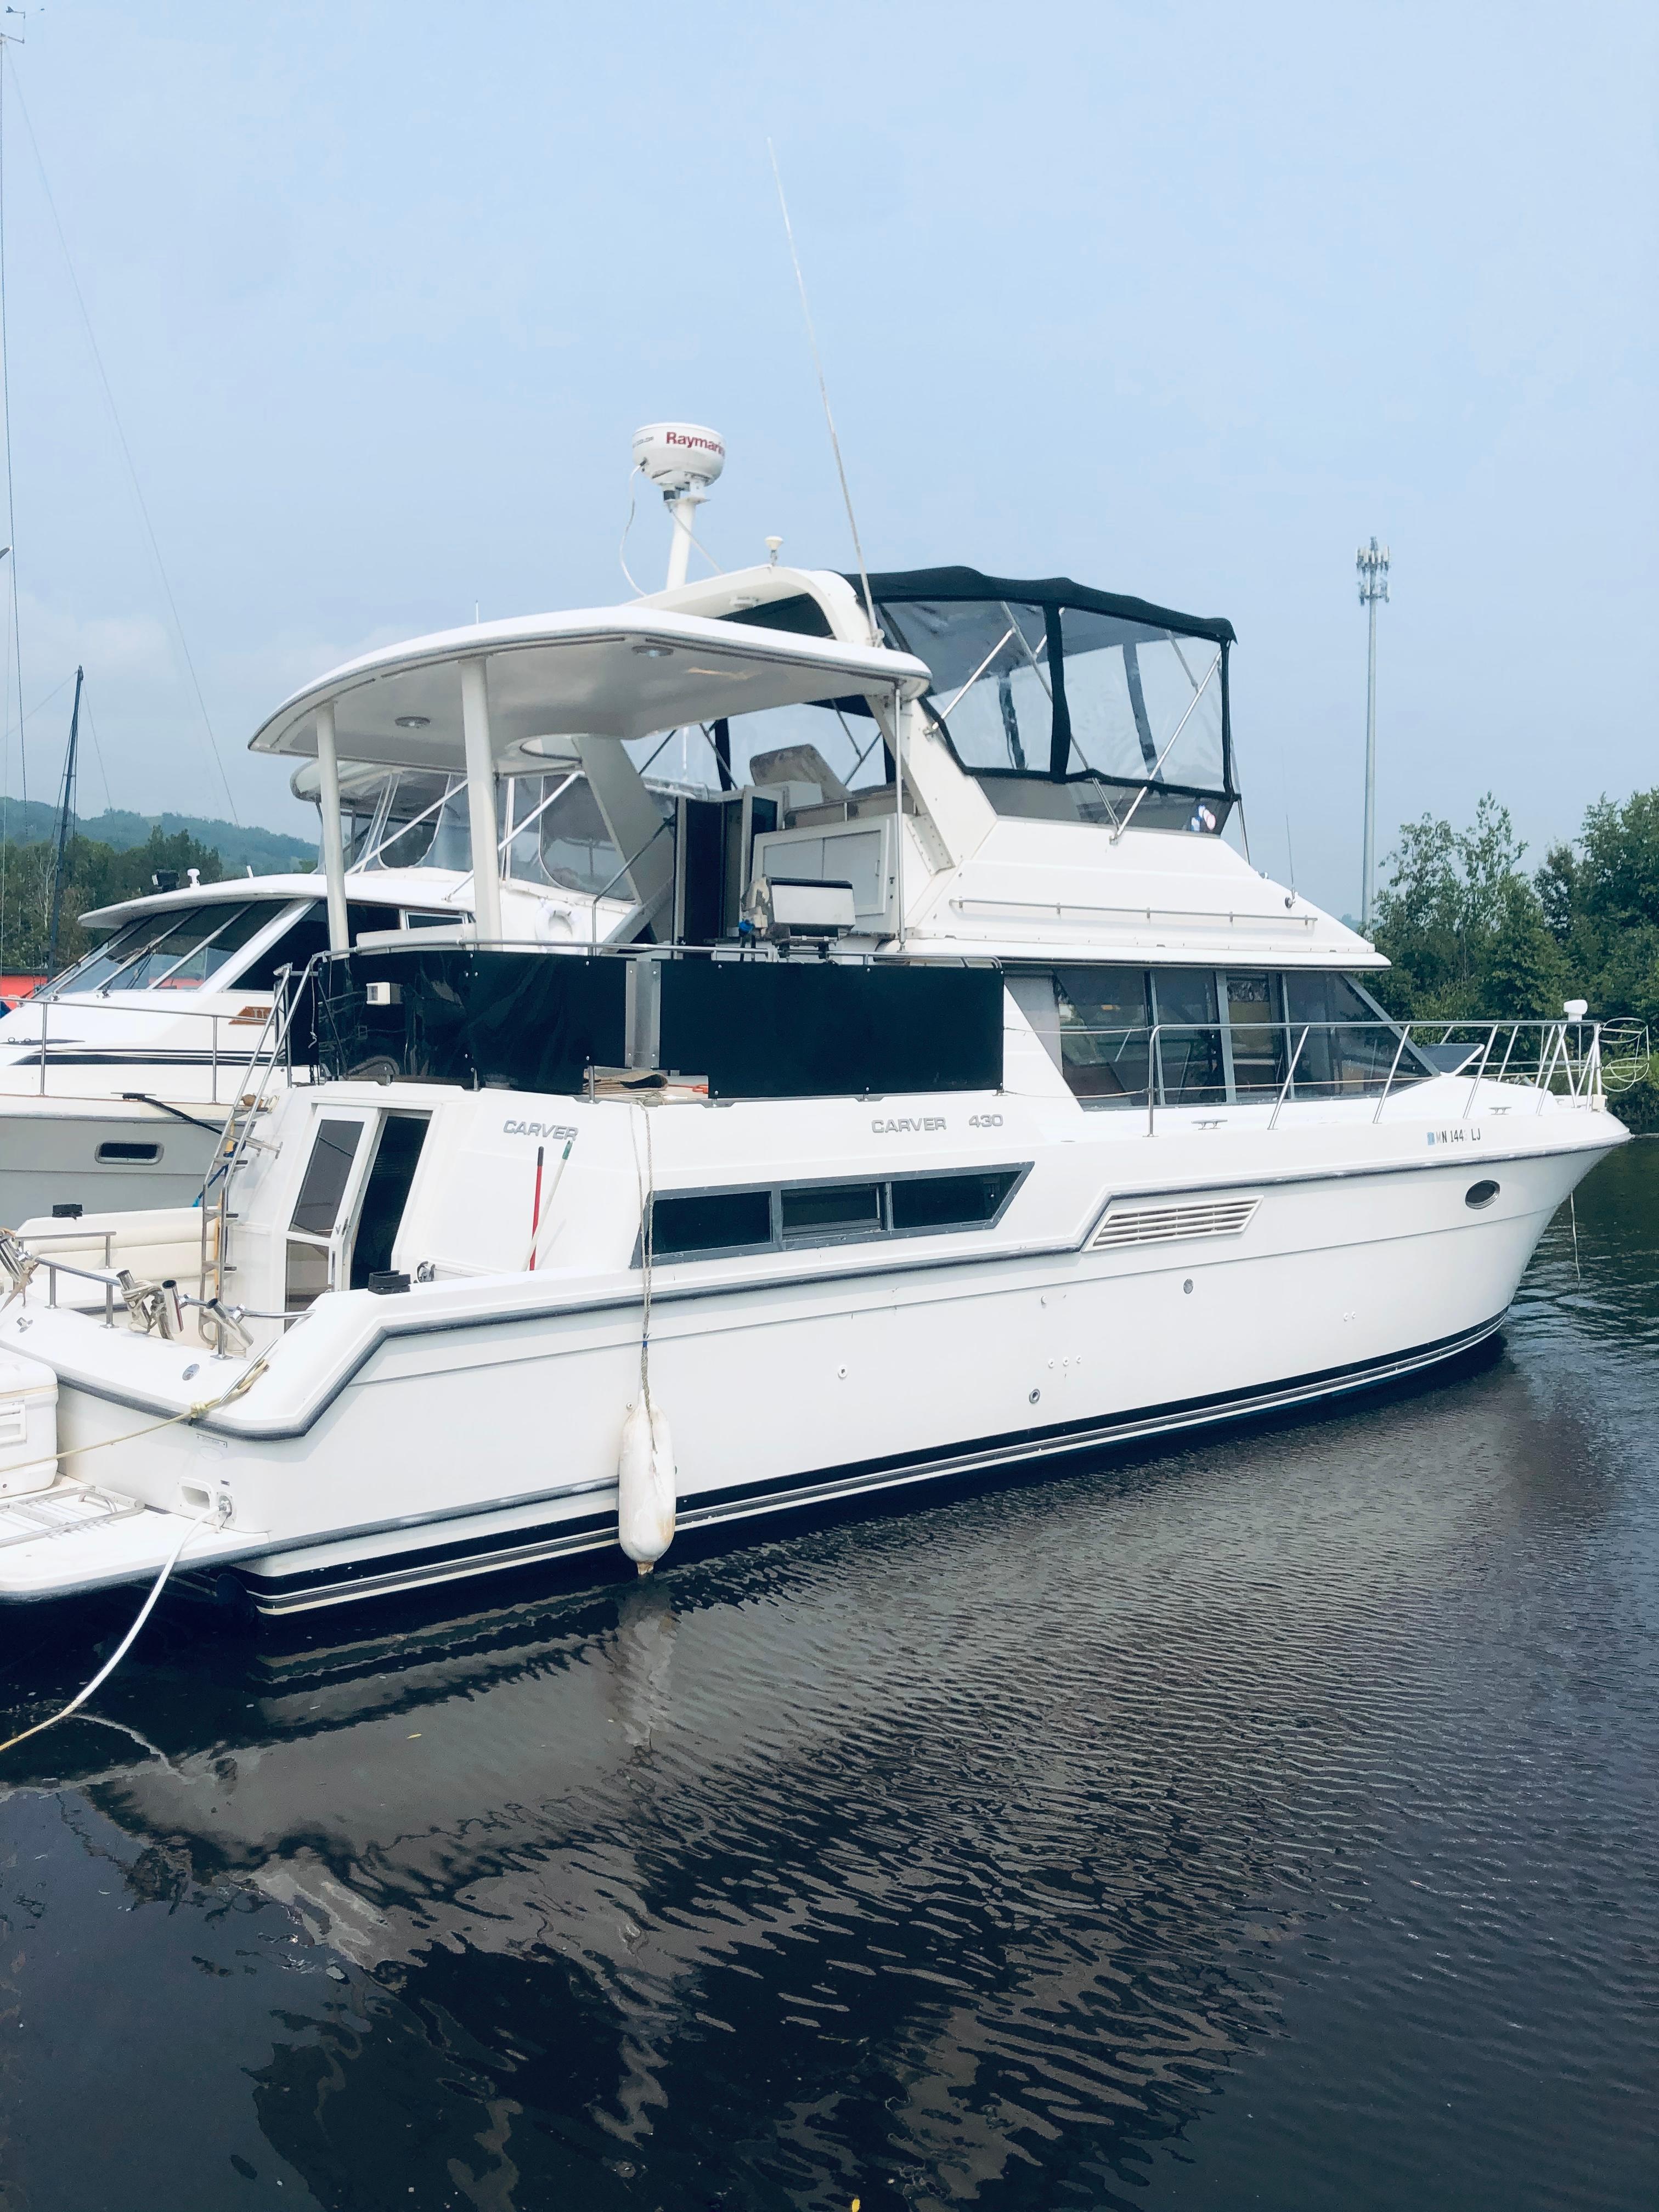 Boats for sale in Minnesota - boats.com